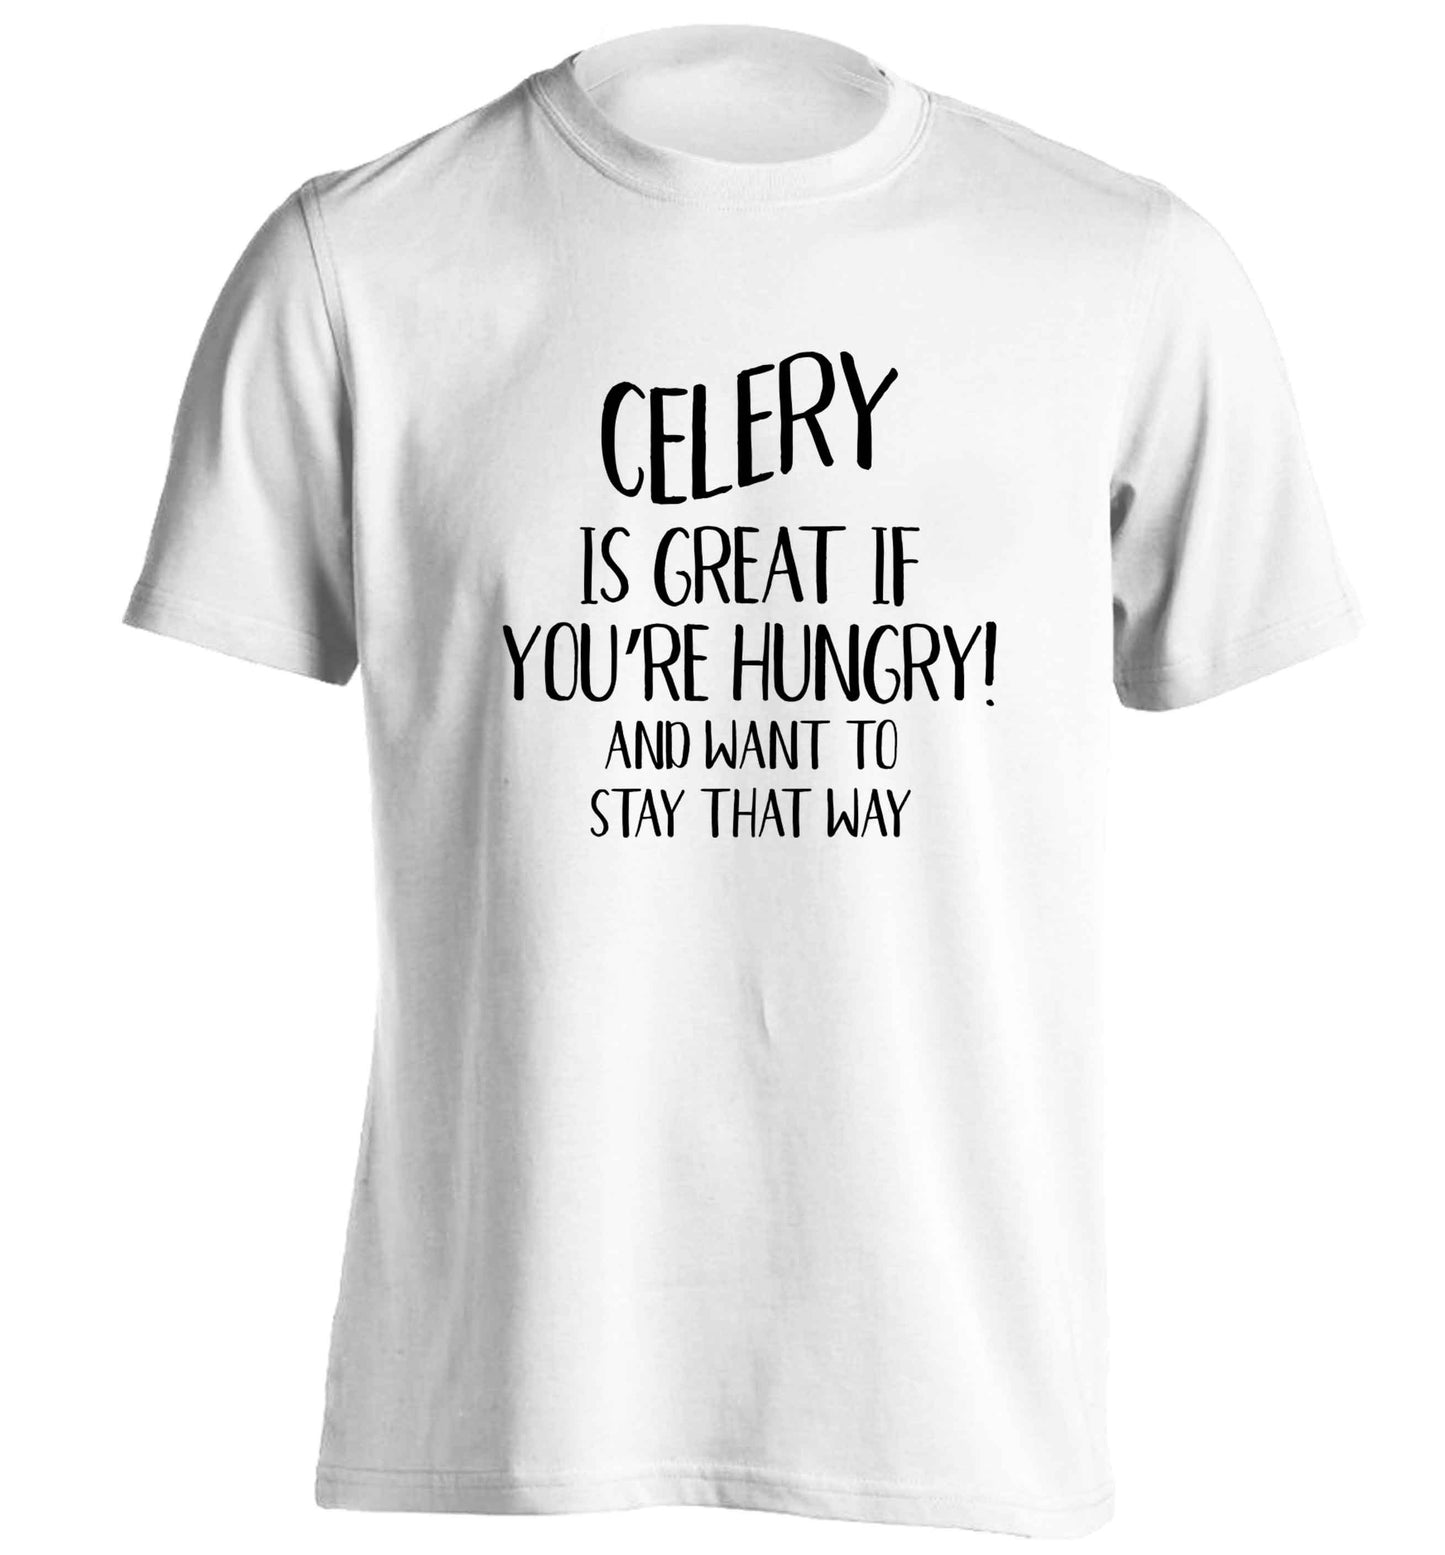 Cellery is great when you're hungry and want to stay that way adults unisex white Tshirt 2XL